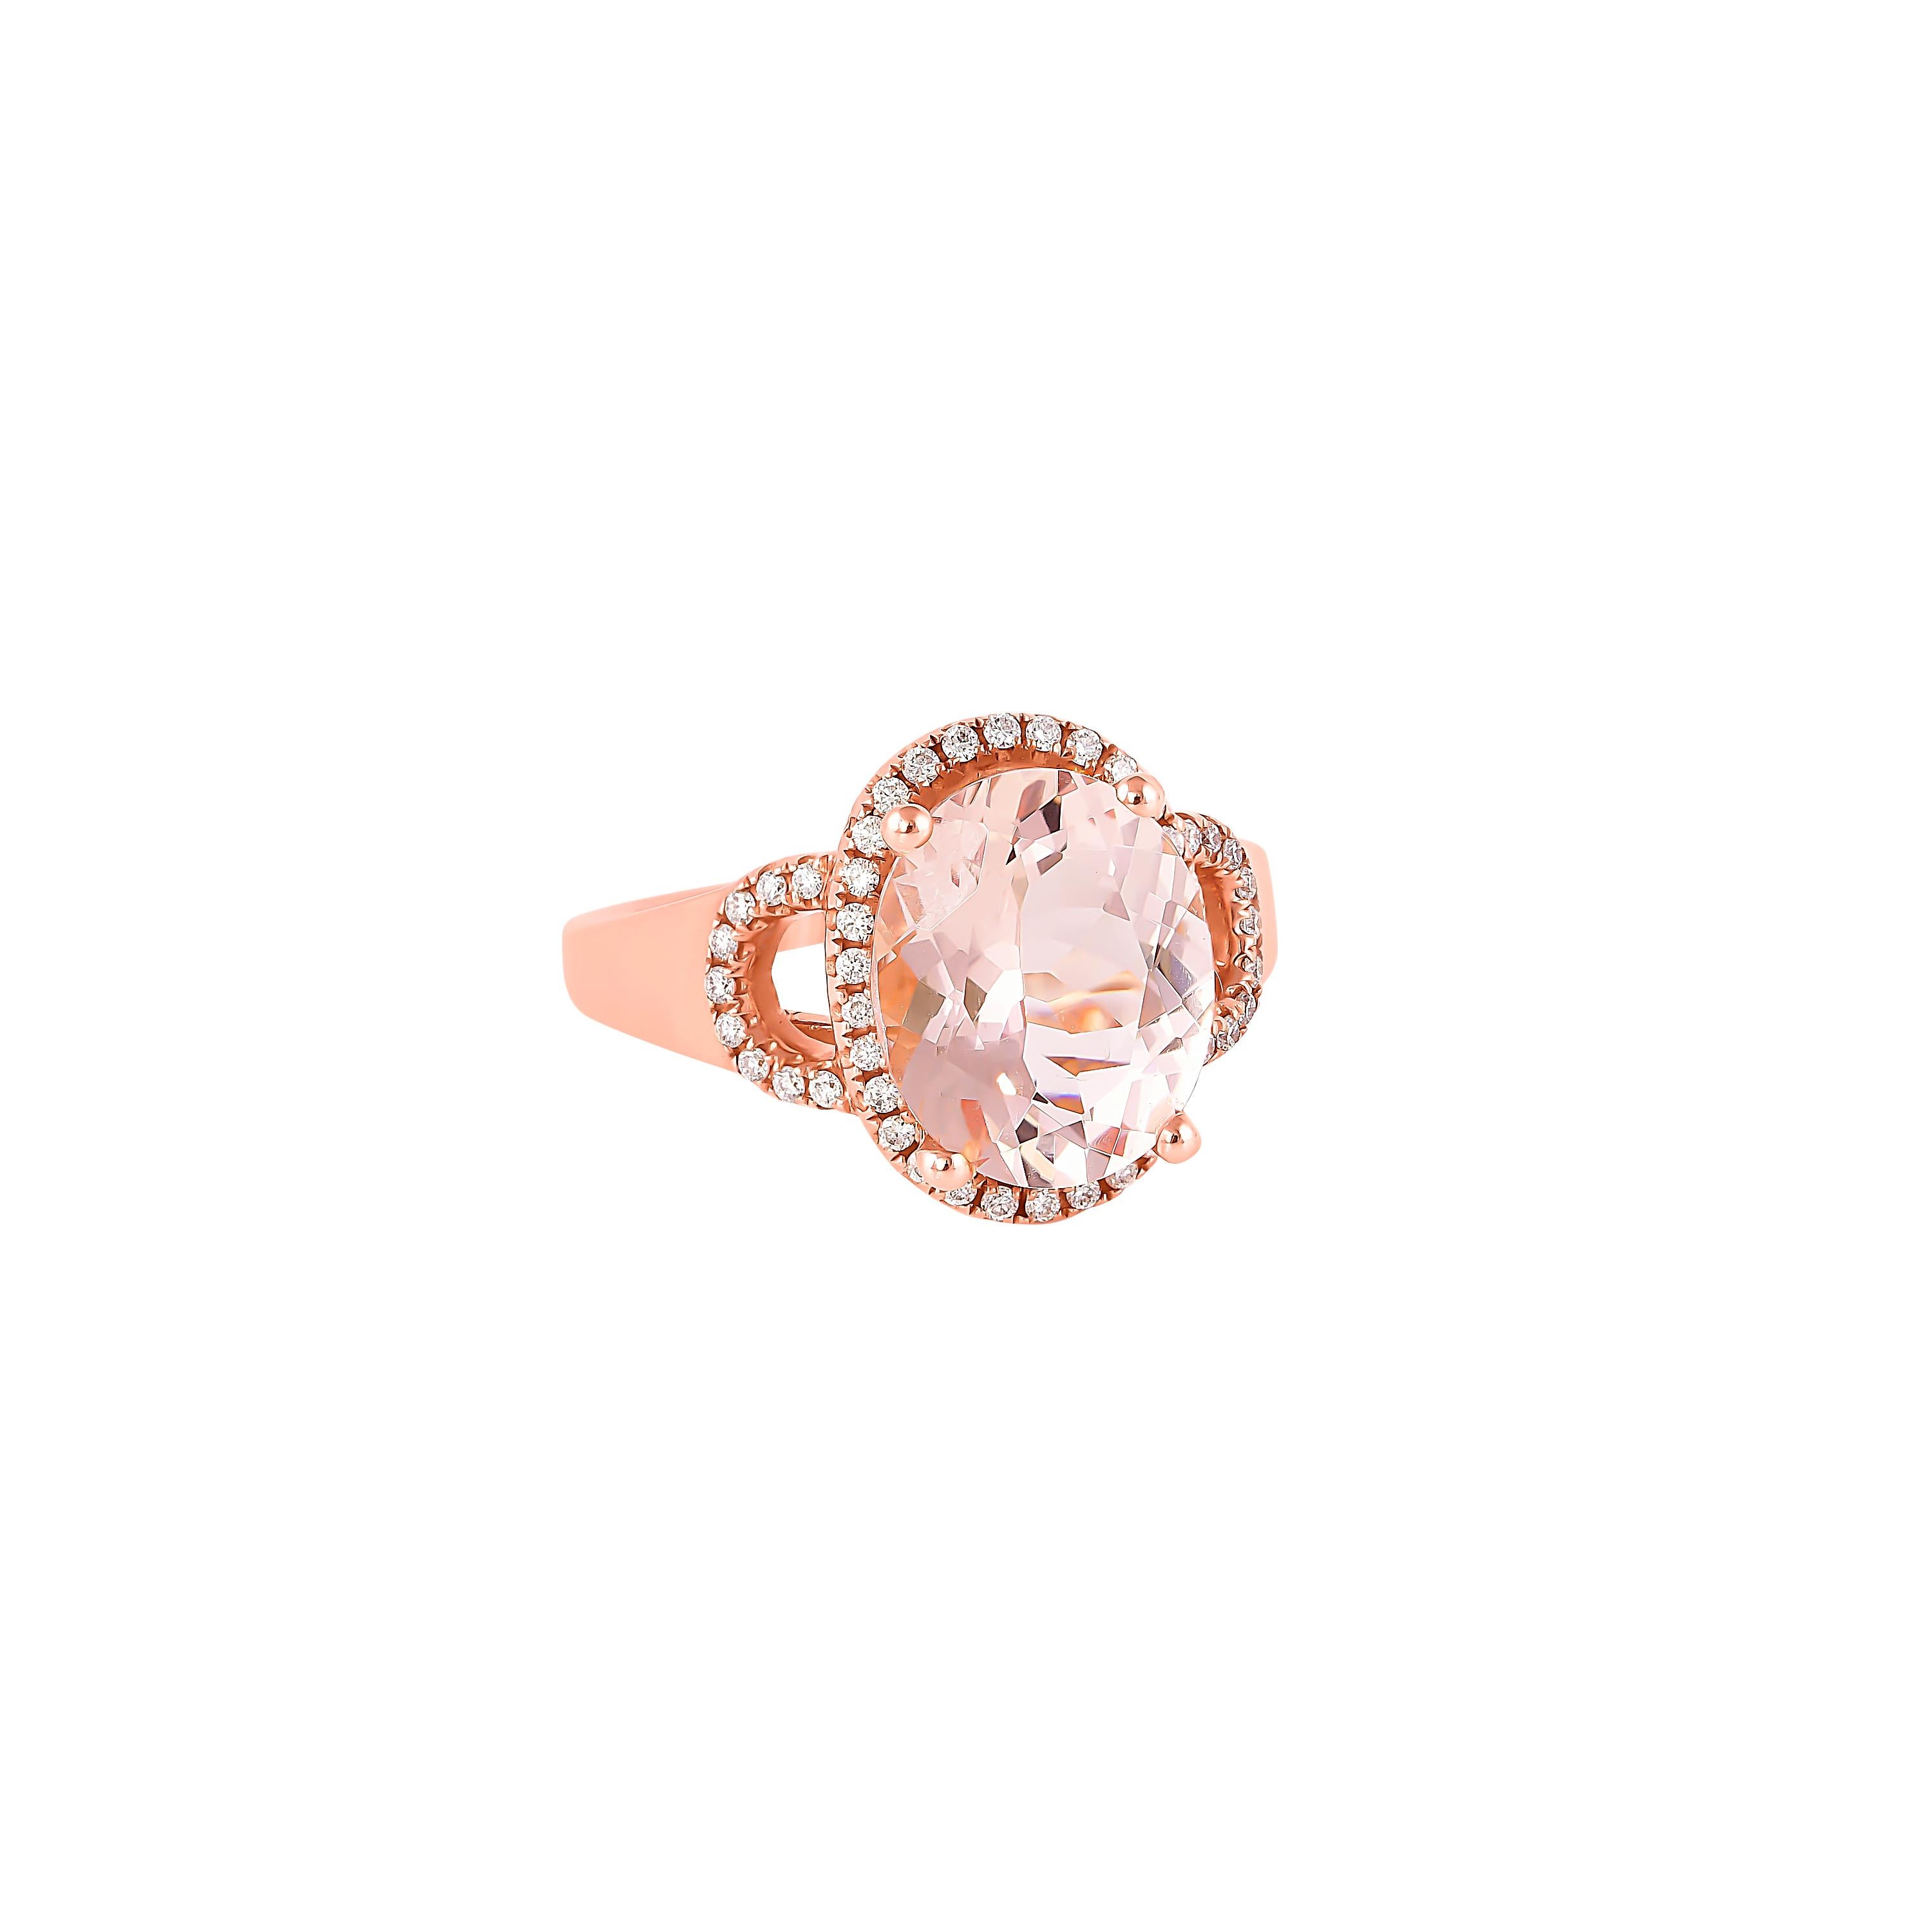 This collection features an array of magnificent morganites! Accented with diamonds these rings are made in rose gold and present a classic yet elegant look. 

Classic morganite ring in 18K rose gold with diamonds. 

Morganite: 4.1 carat oval